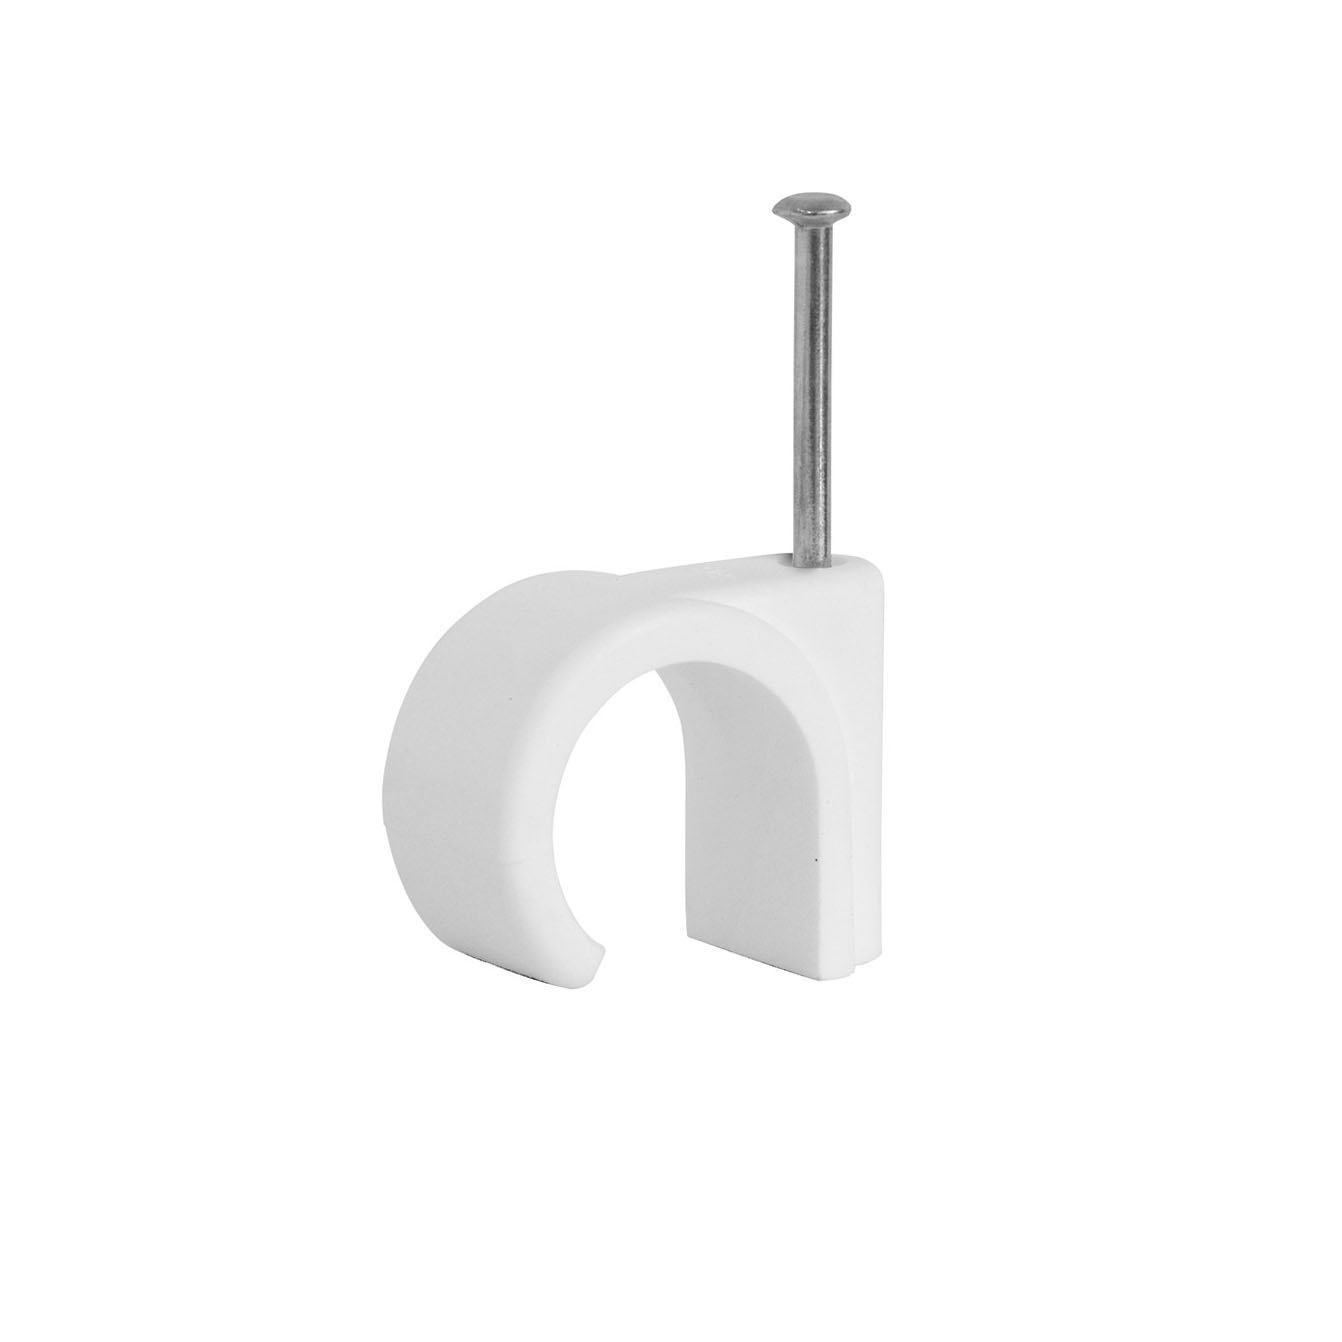 10.0mm C/Clips rd White Value Pack Diy 1505 (Large Letter Rate)